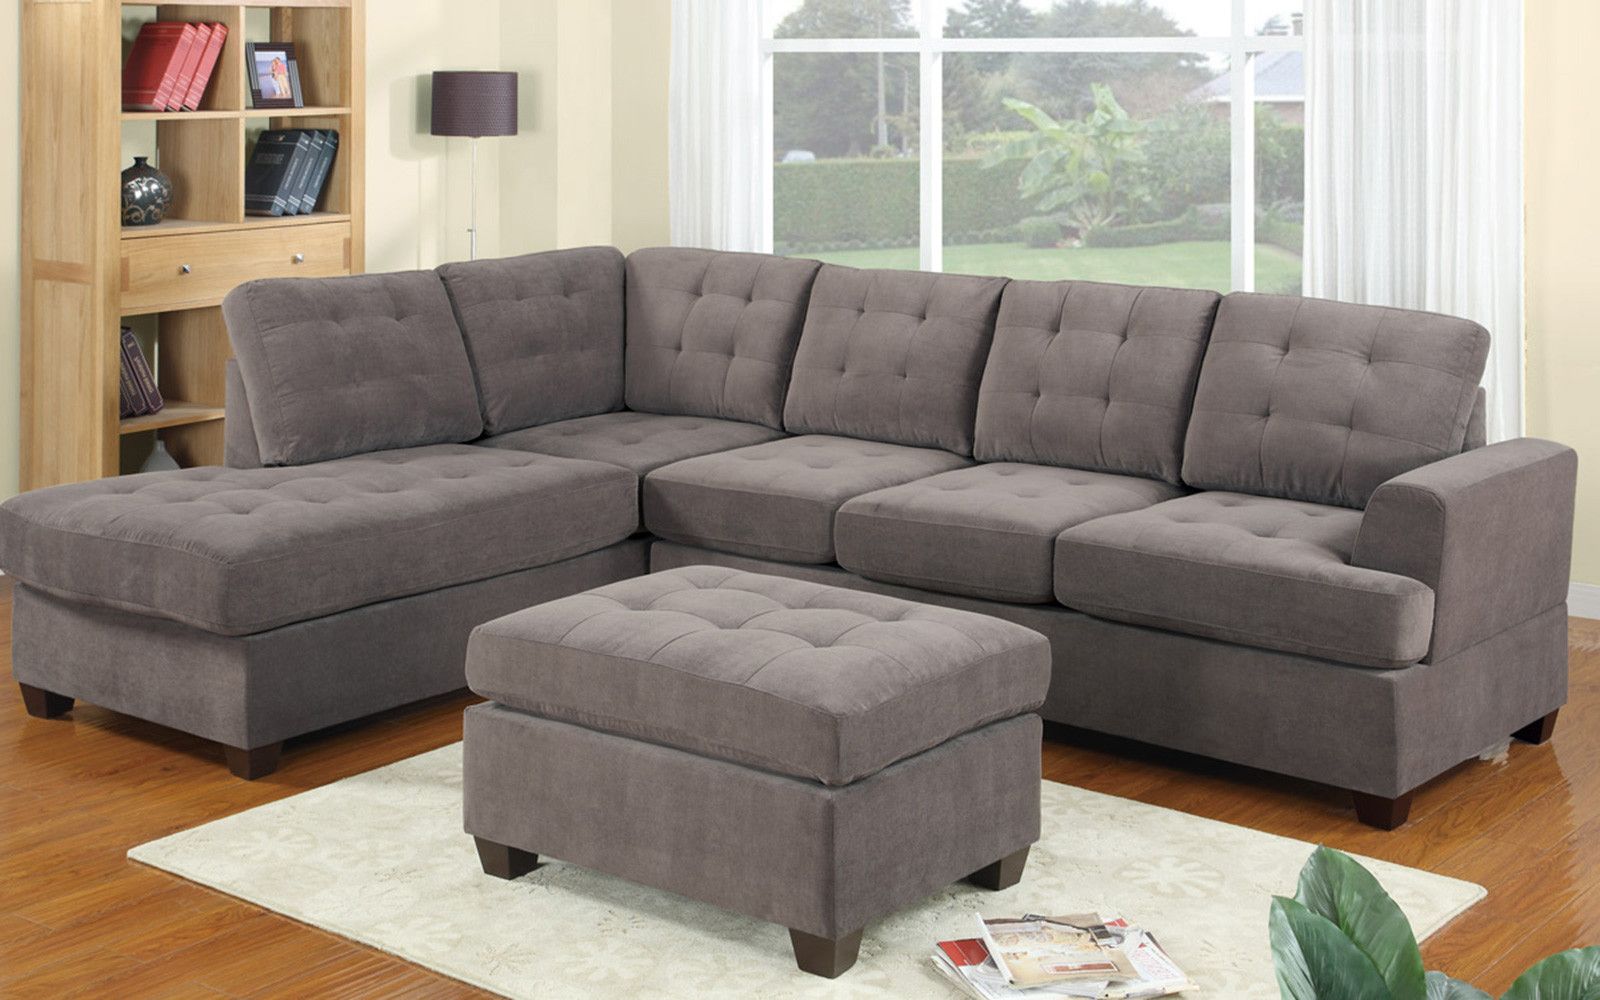 The Beauty Of Microfiber Sectional Sofa – Decorifusta In Microfiber Sectional Corner Sofas (View 13 of 20)